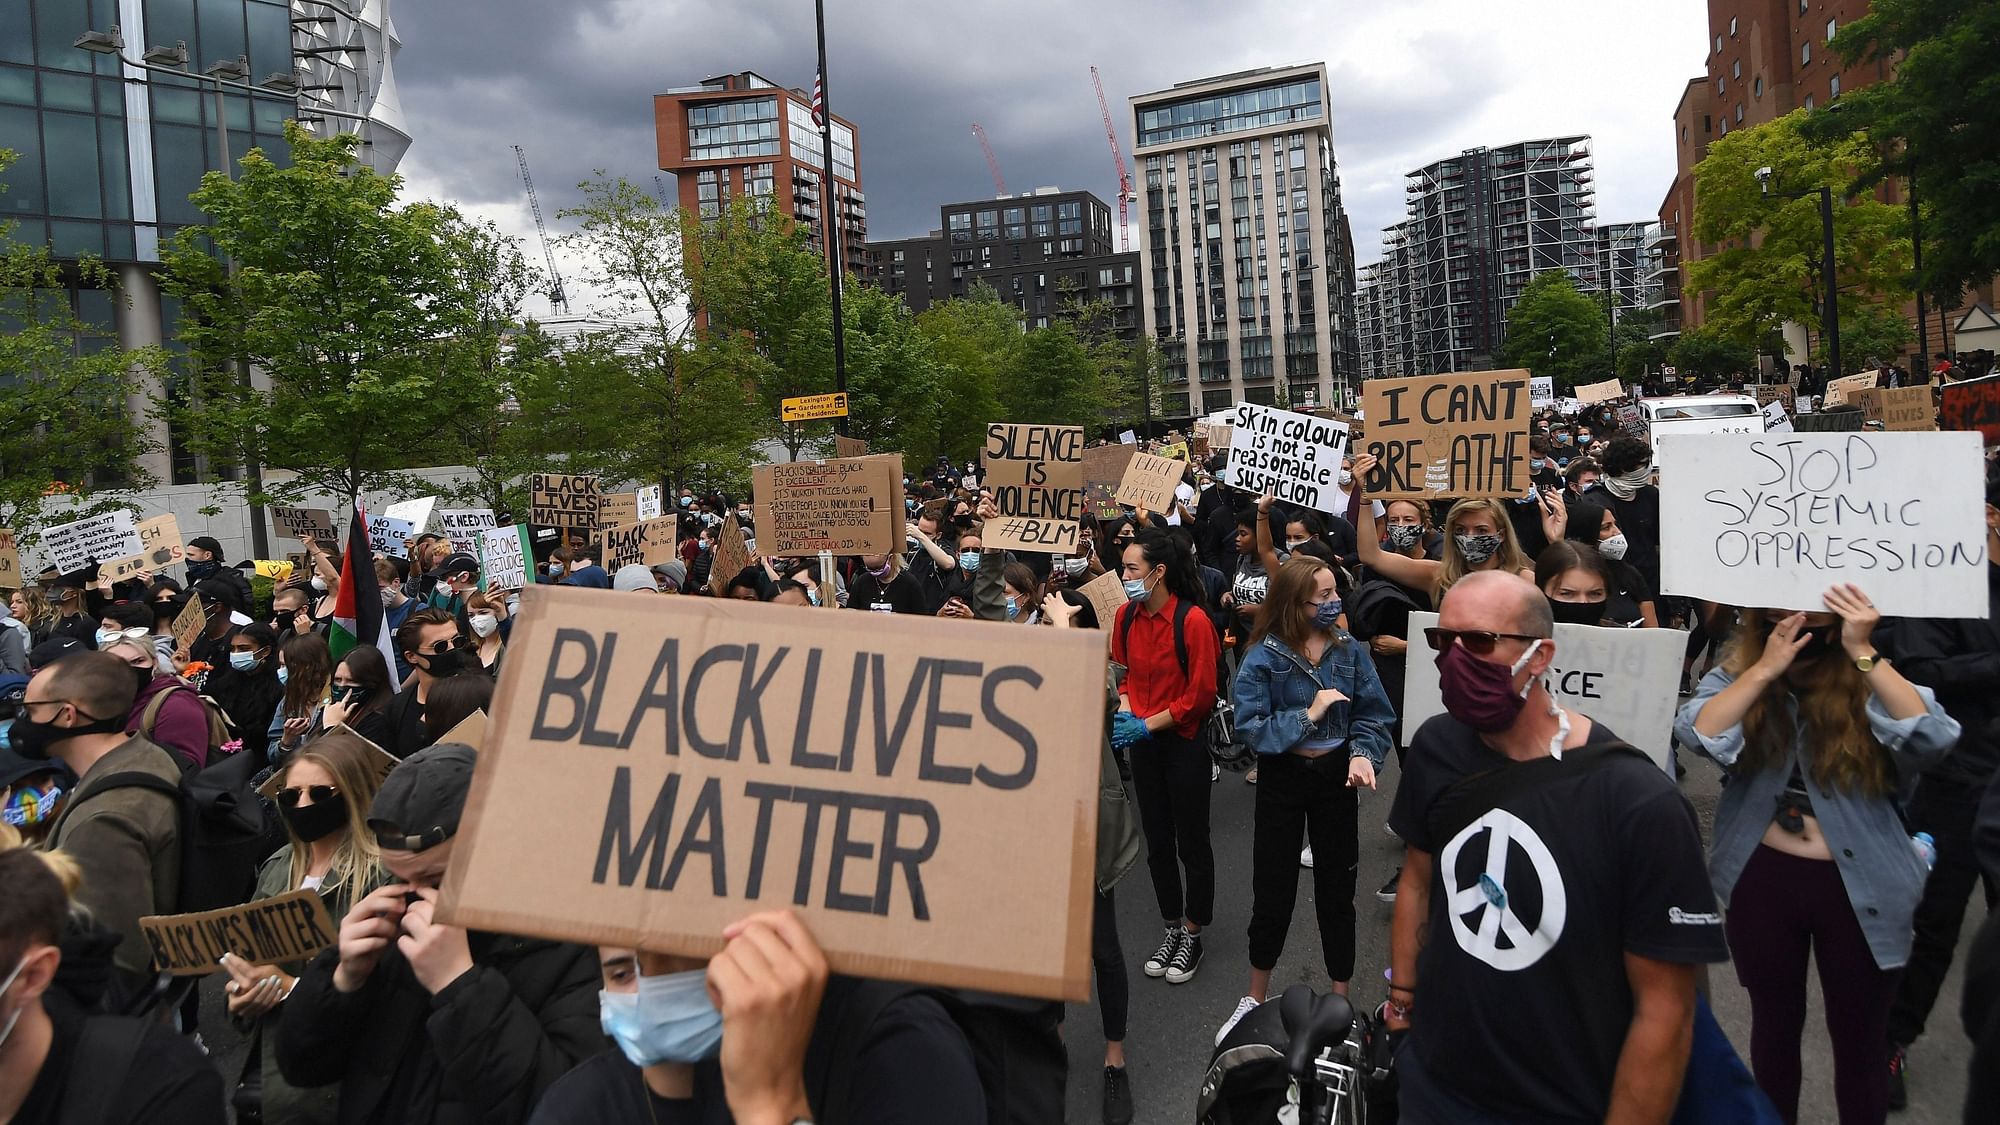 Image of a Black Lives Matter protest used for representation purpose.